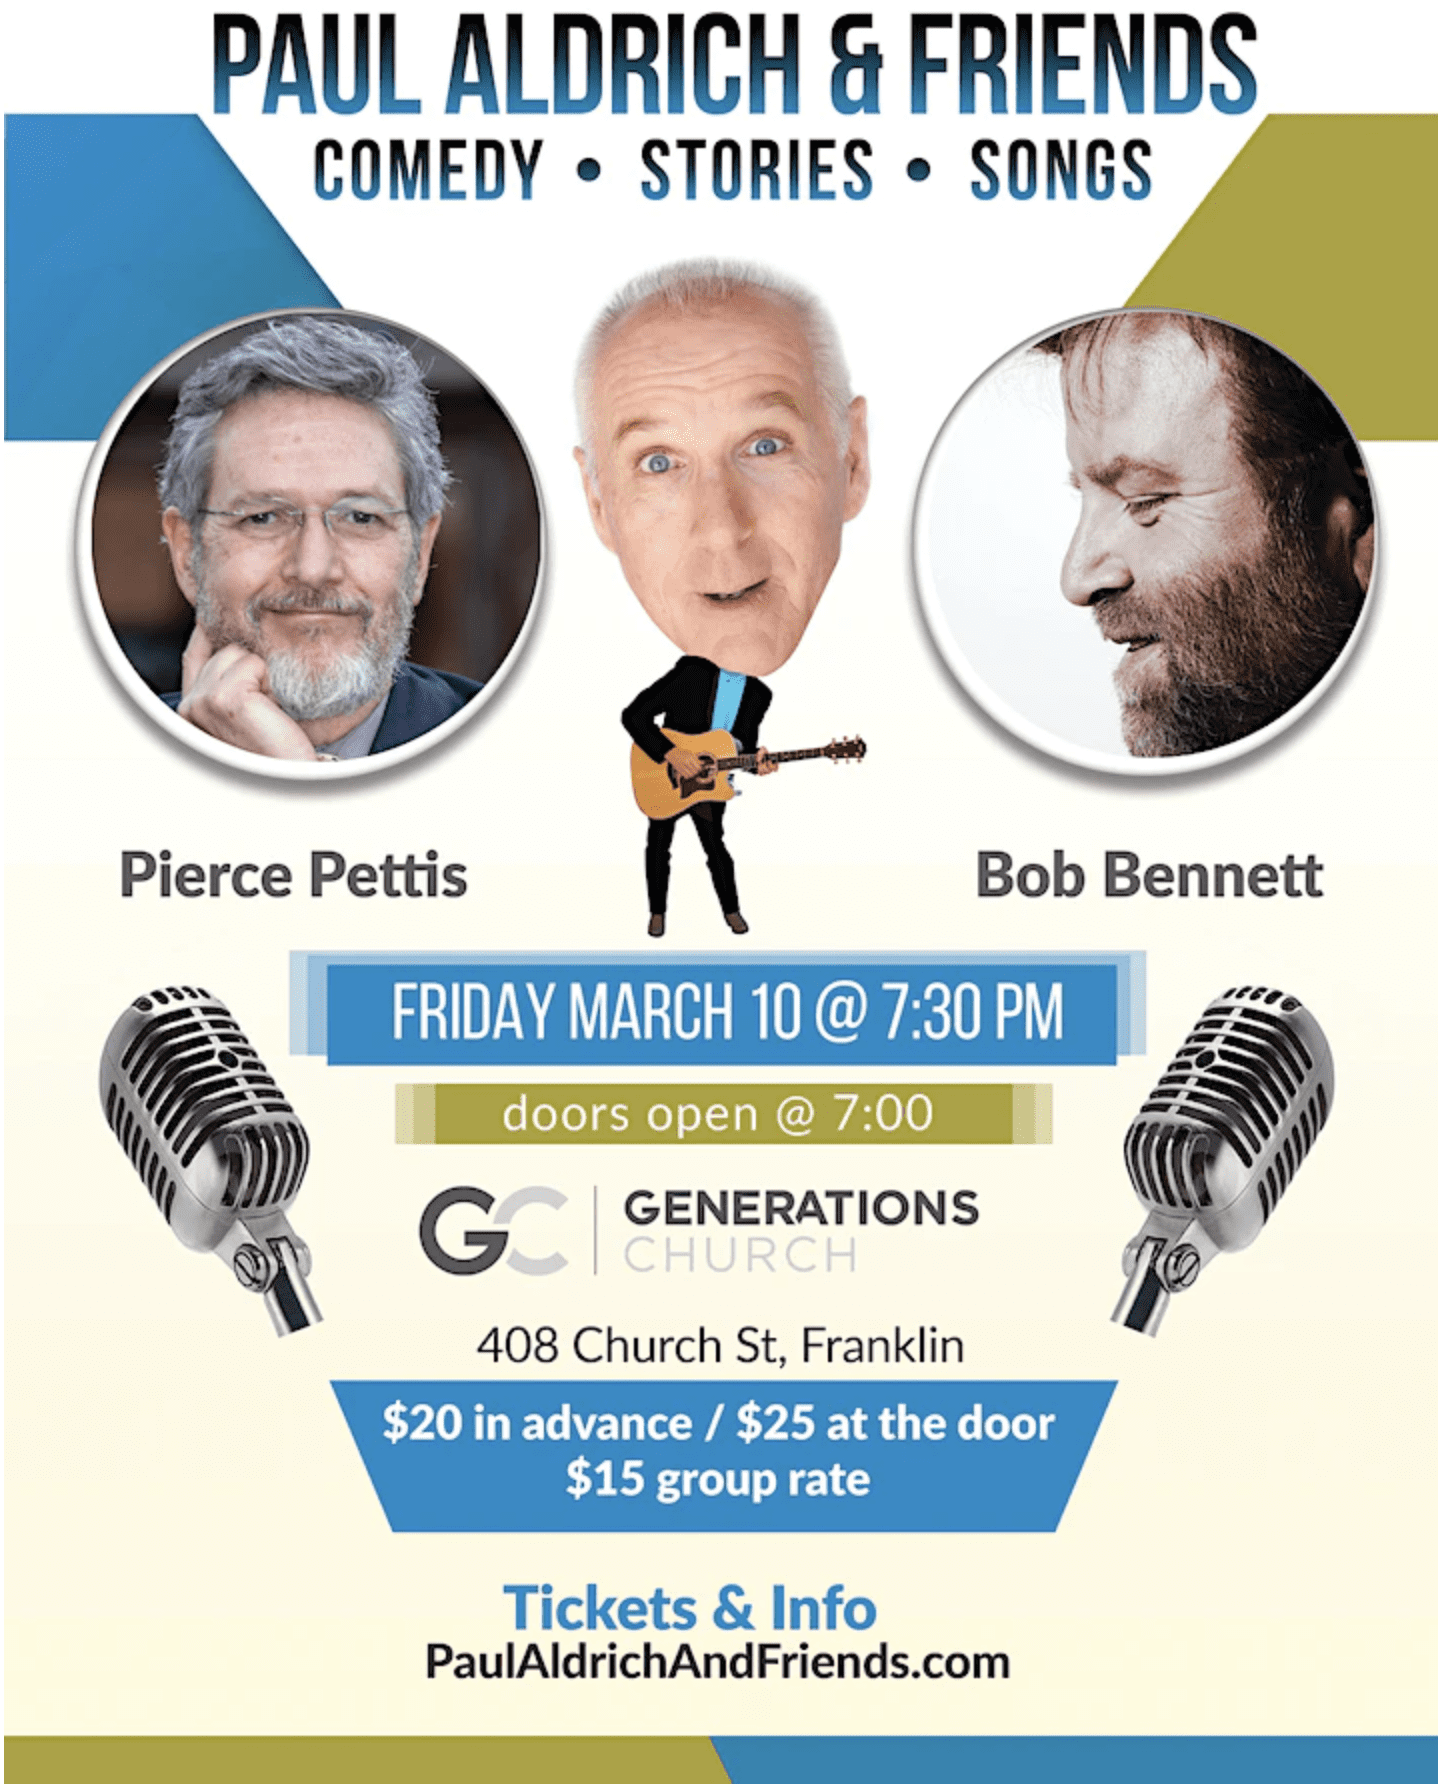 Paul Aldrich & Friends SPRING SHOW in Franklin, Tennessee, Musical Comedian Paul Aldrich hosts two of Christian Music's finest singer/songwriters – BOB BENNETT and PIERCE PETTIS!